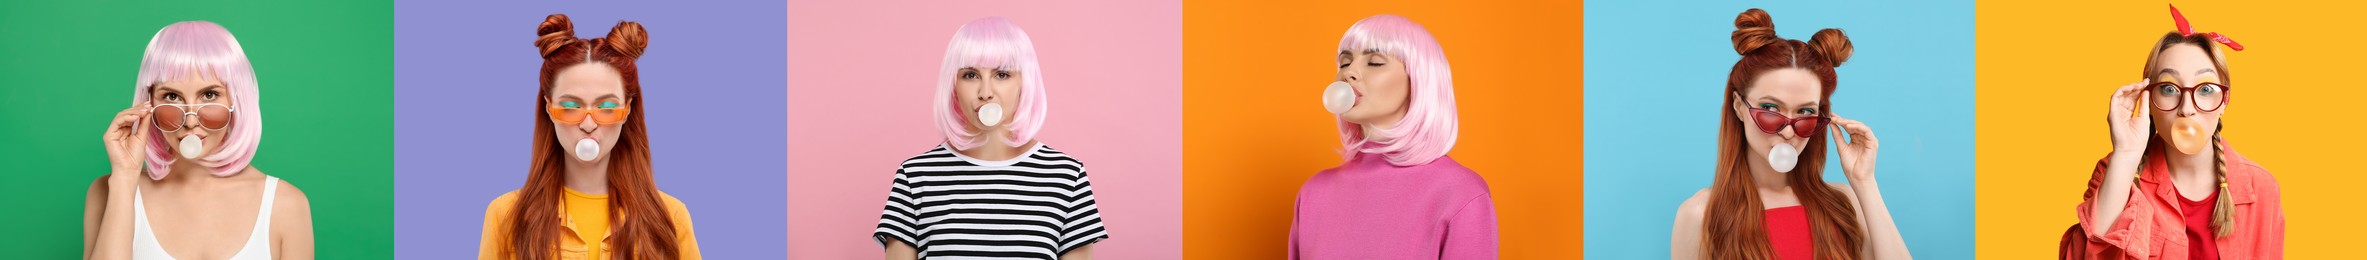 Image of Women blowing bubble gums on color backgrounds, set of photos